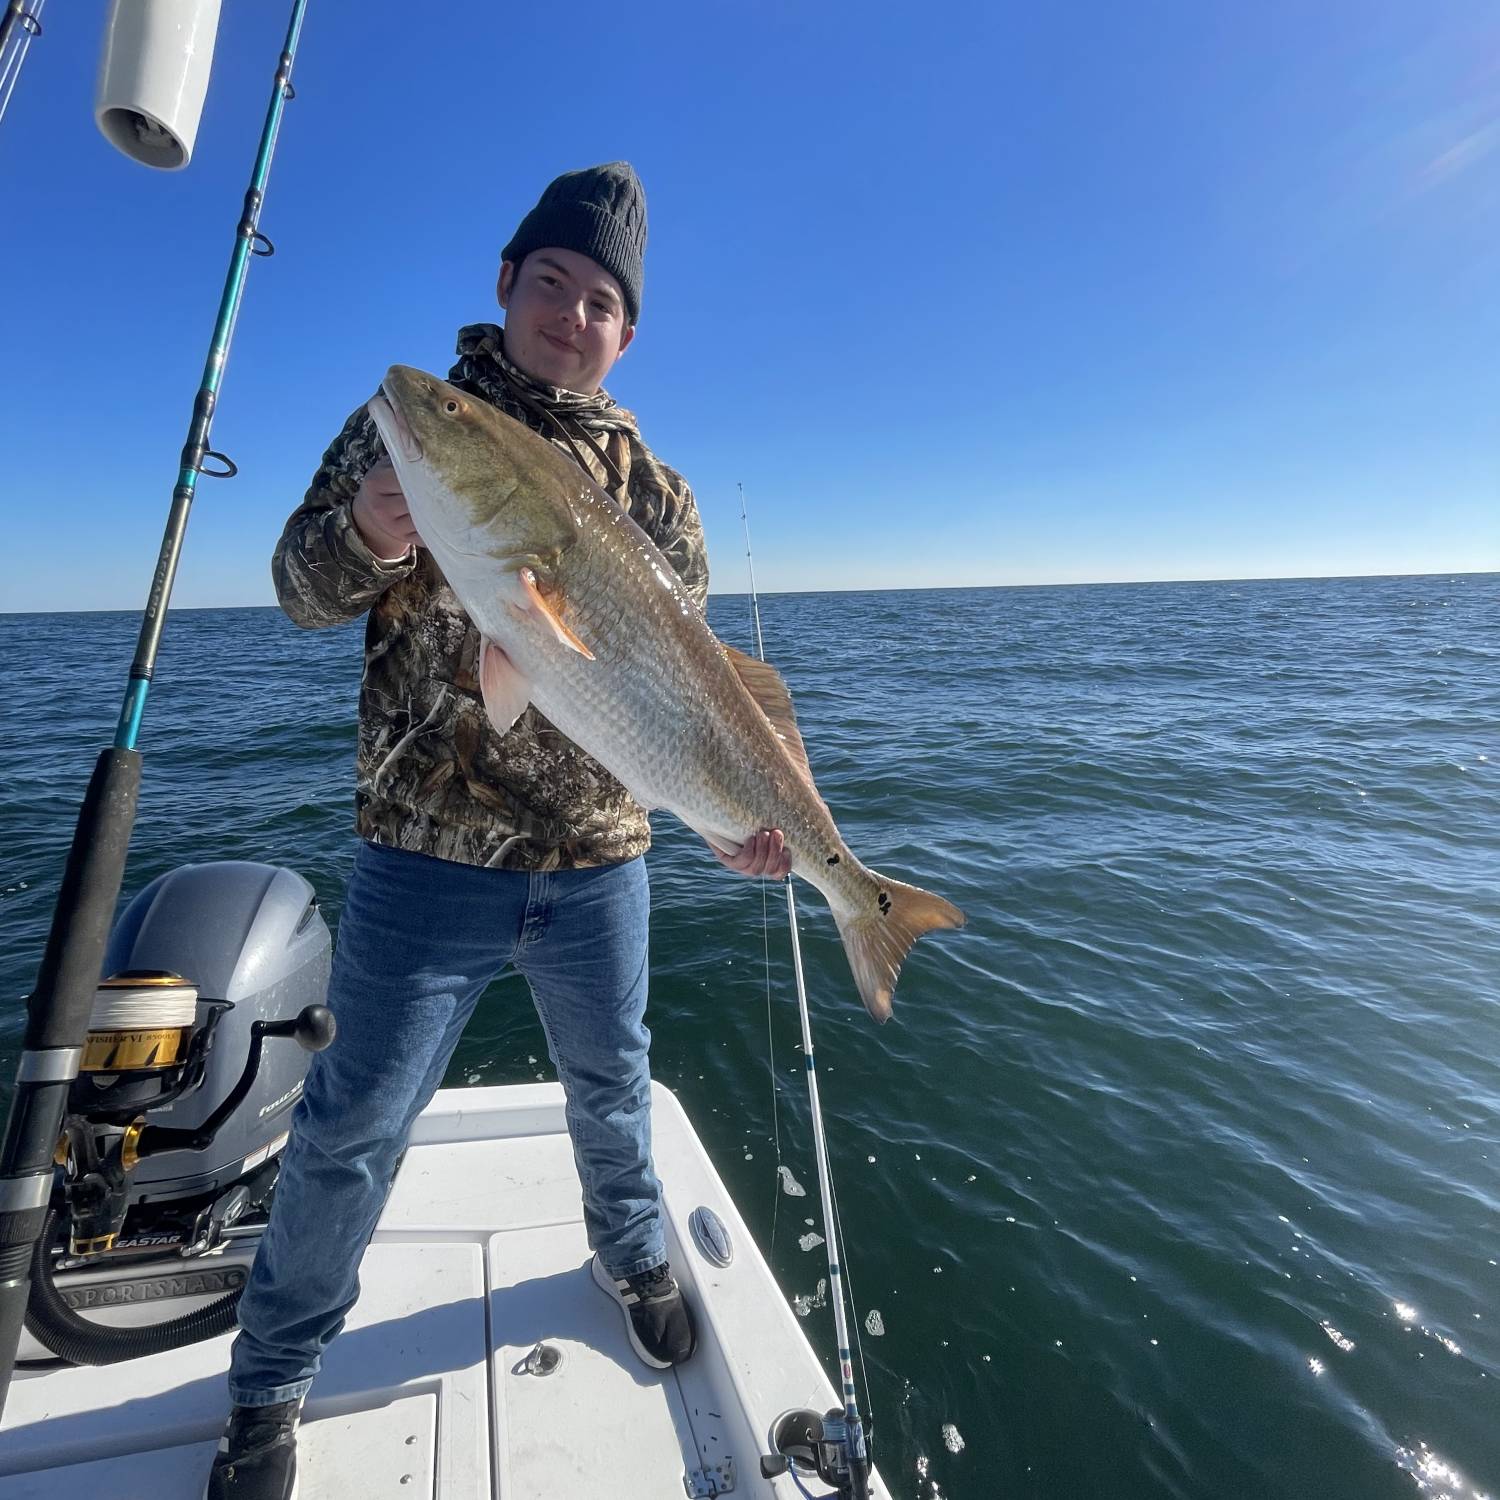 Title: 48 inch redfish caught 20 miles off of amelia island on small rod - On board their Sportsman Masters 227 Bay Boat - Location: 20 miles off of amelia island, florida. Participating in the Photo Contest #SportsmanJanuary2024